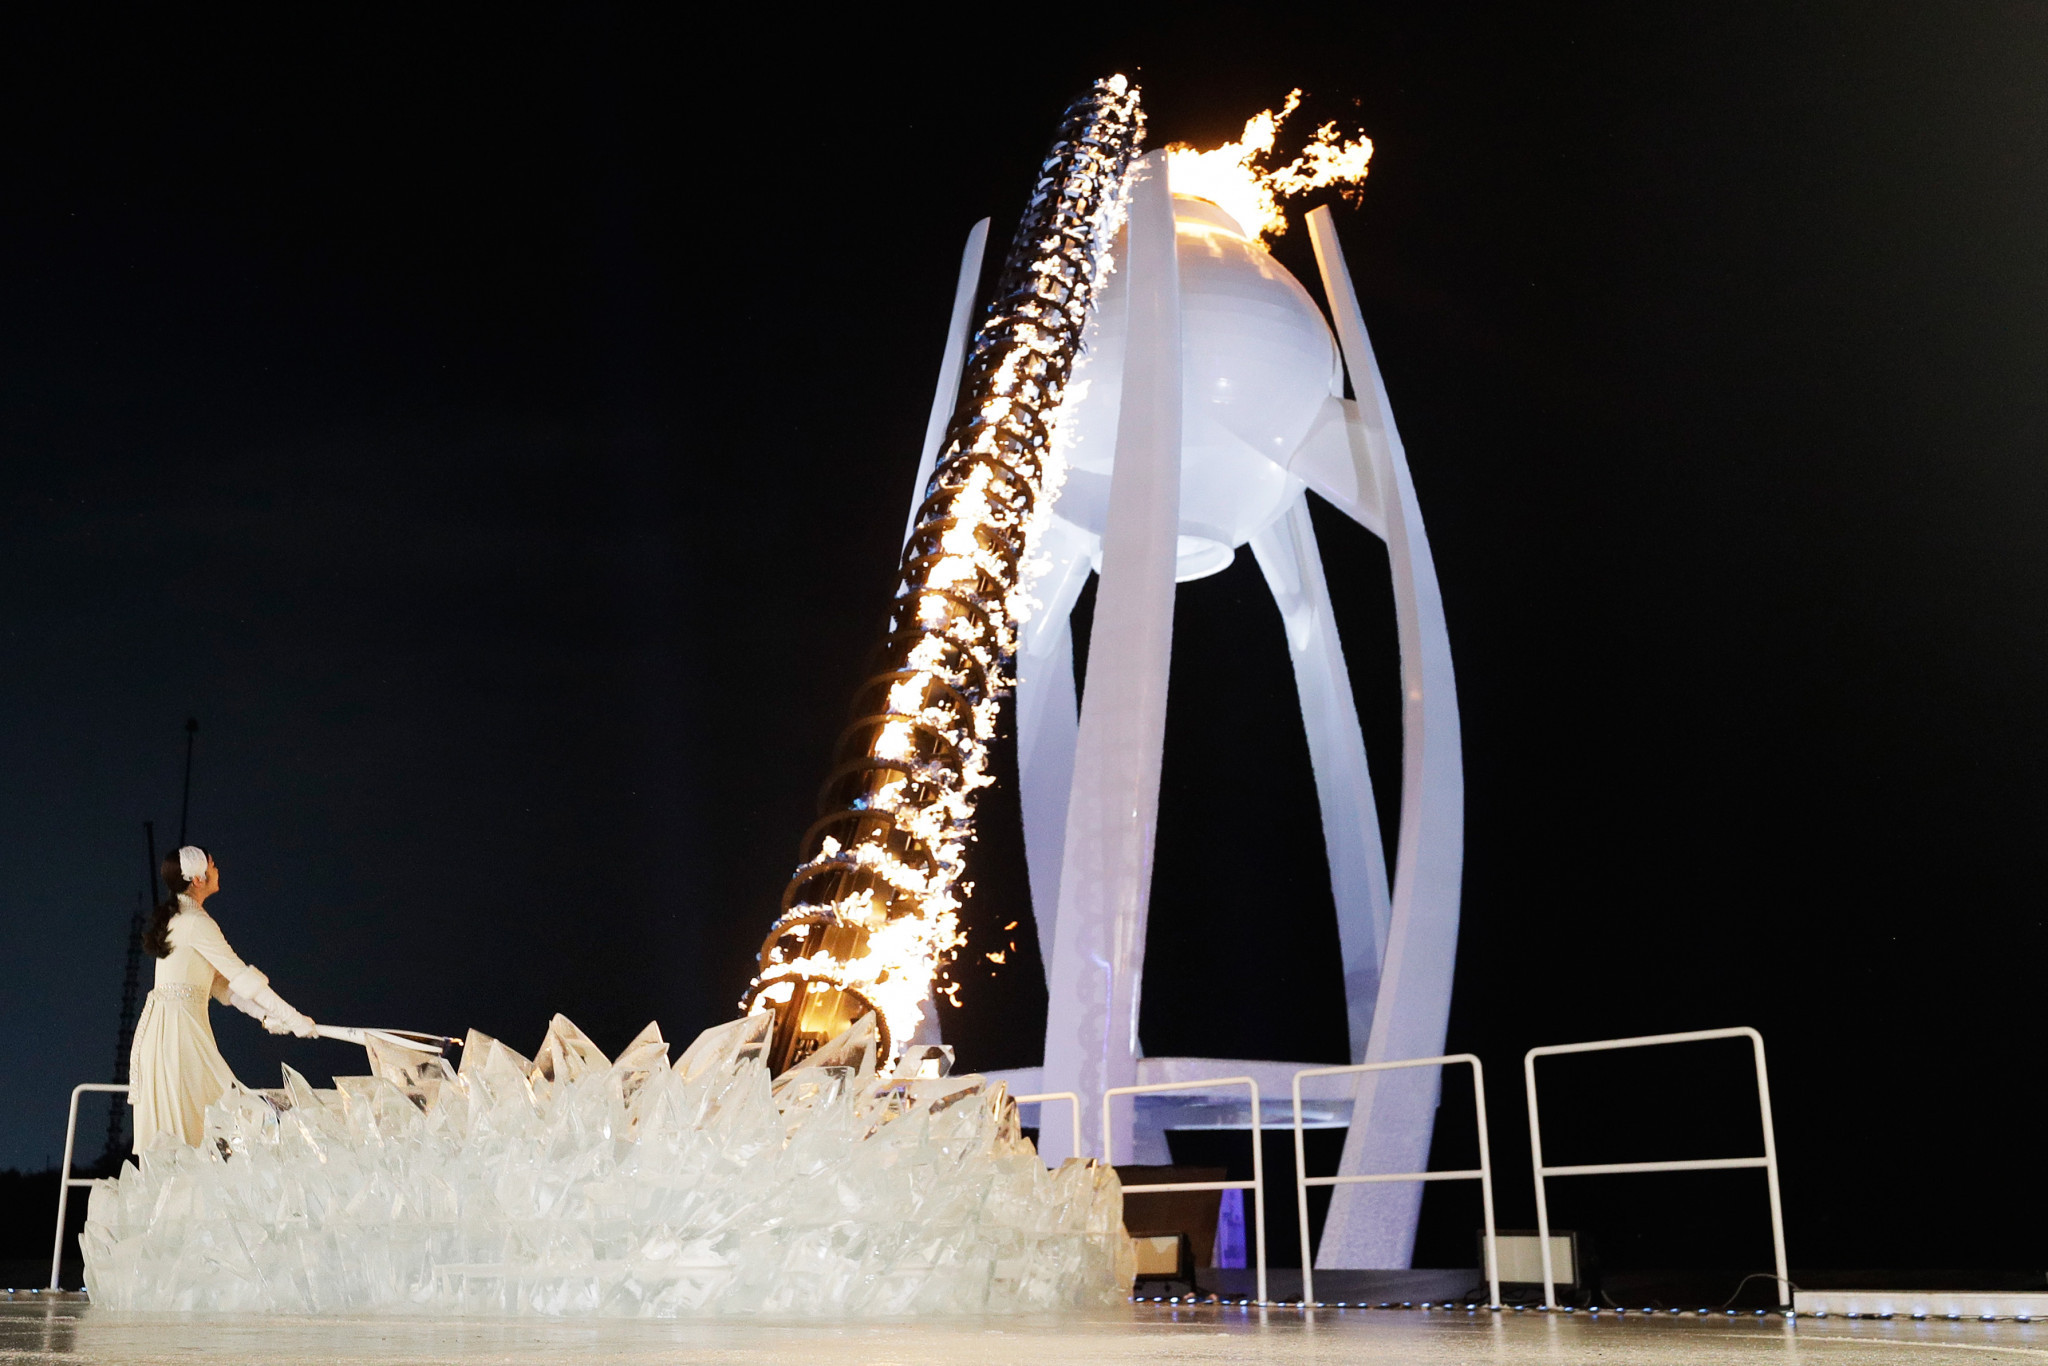 Kim Yuna lit the Olympic Cauldron at the close of the Opening Ceremony ©Getty Images